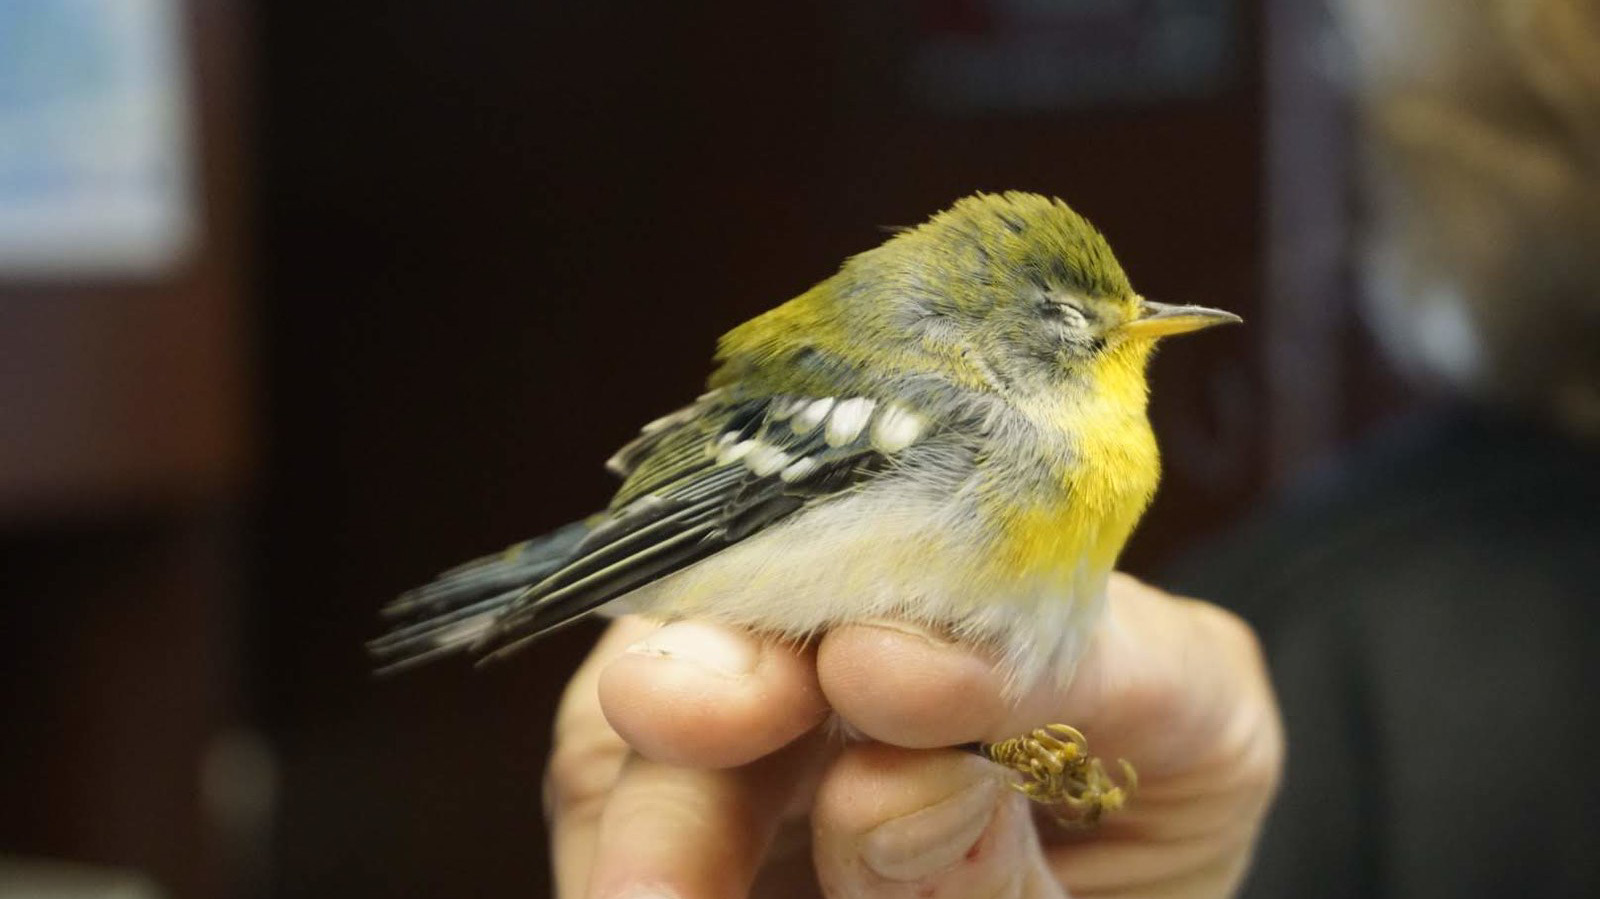 A stunned Northern Parula, a songbird that collided with a building in Manhattan’s Flatiron neighborhord and was found by a Project Safe Flight Collisions monitor in Fall 2019. Photo: NYC Audubon